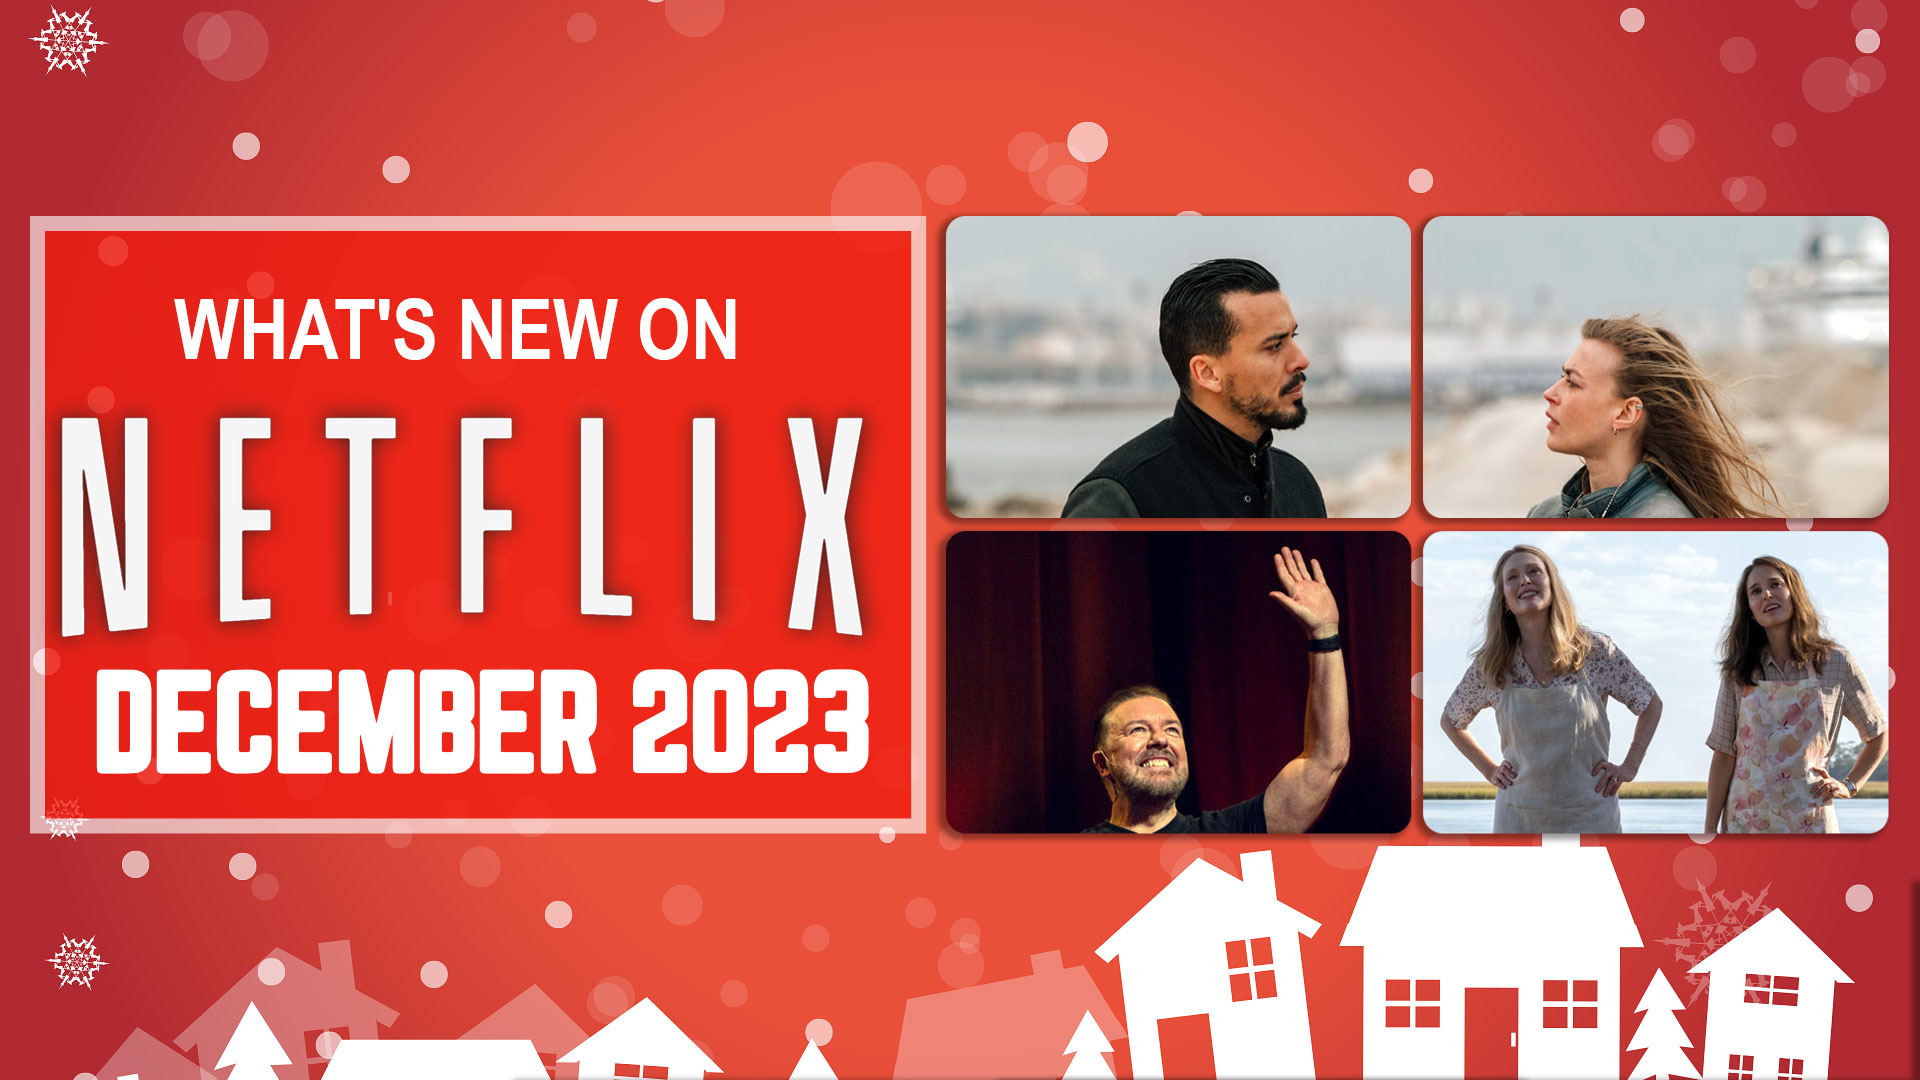 What's New on Netflix December 2023